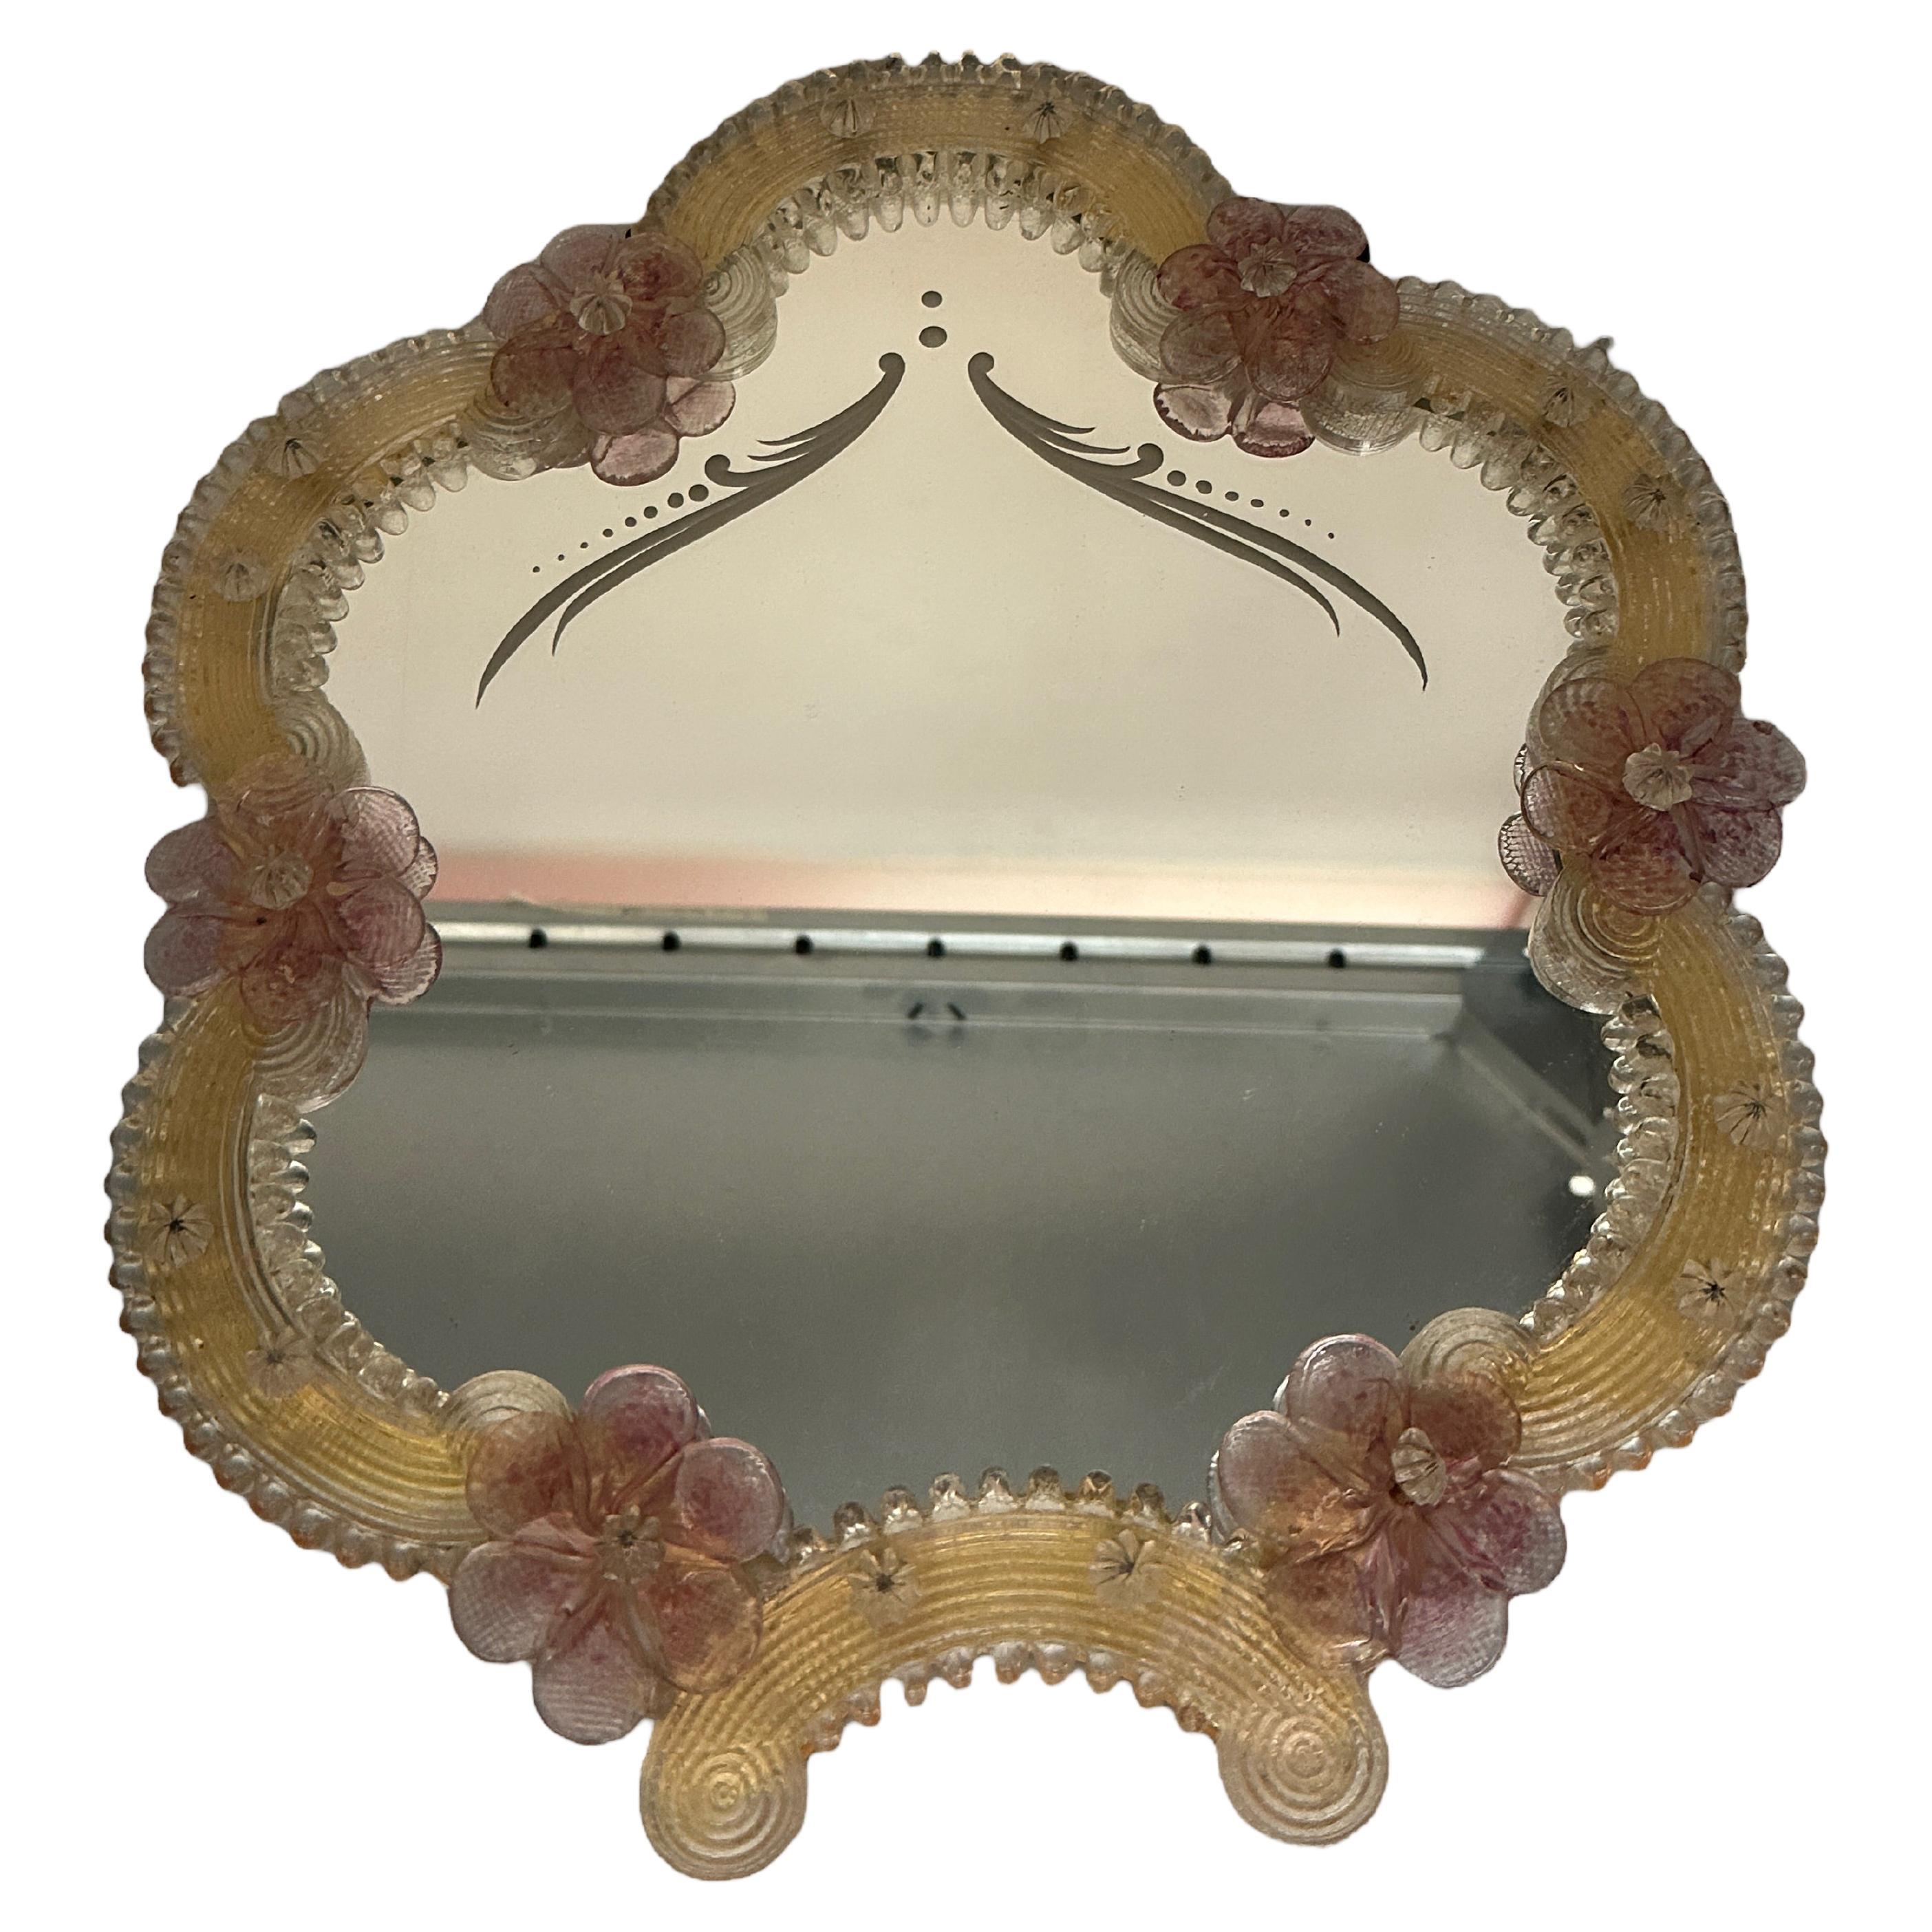 A gorgeous Murano glass vanity mirror surrounded with handmade pink glass flowers. Beautiful wall mirror. With minor signs of wear as expected with age and use. A nice addition to any girls or ladies room. Its stands about 1 1/4